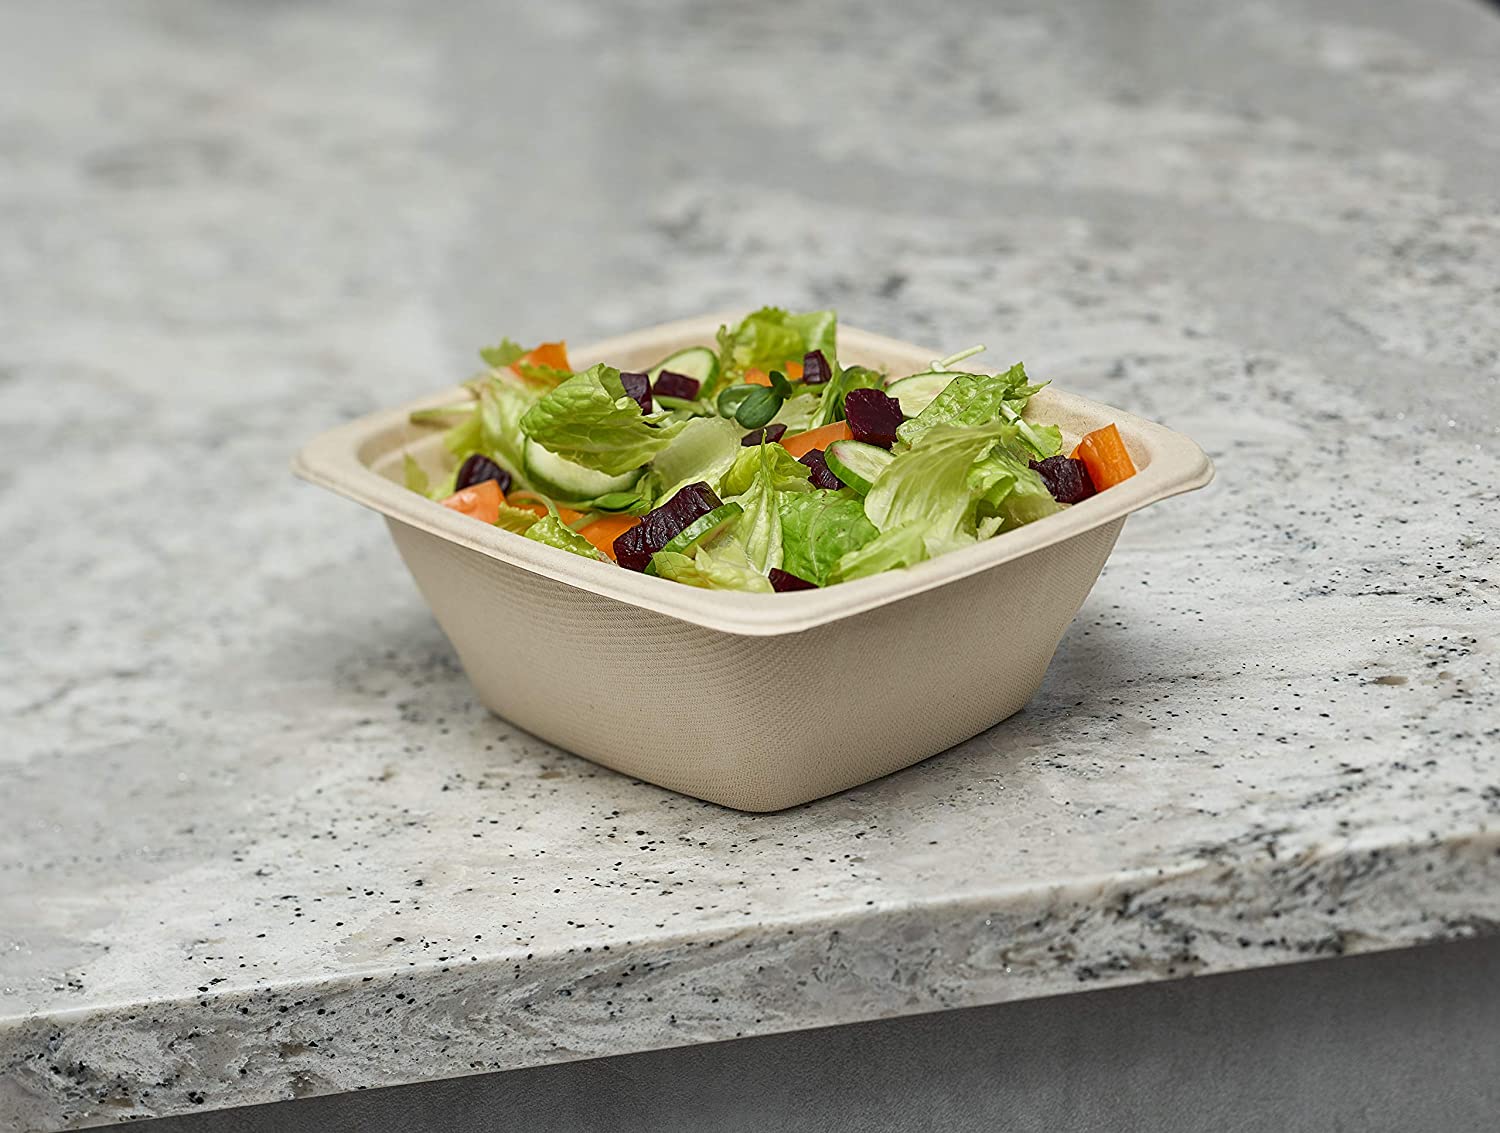 Eco Friendly Disposable Square Bowls Compostable Container